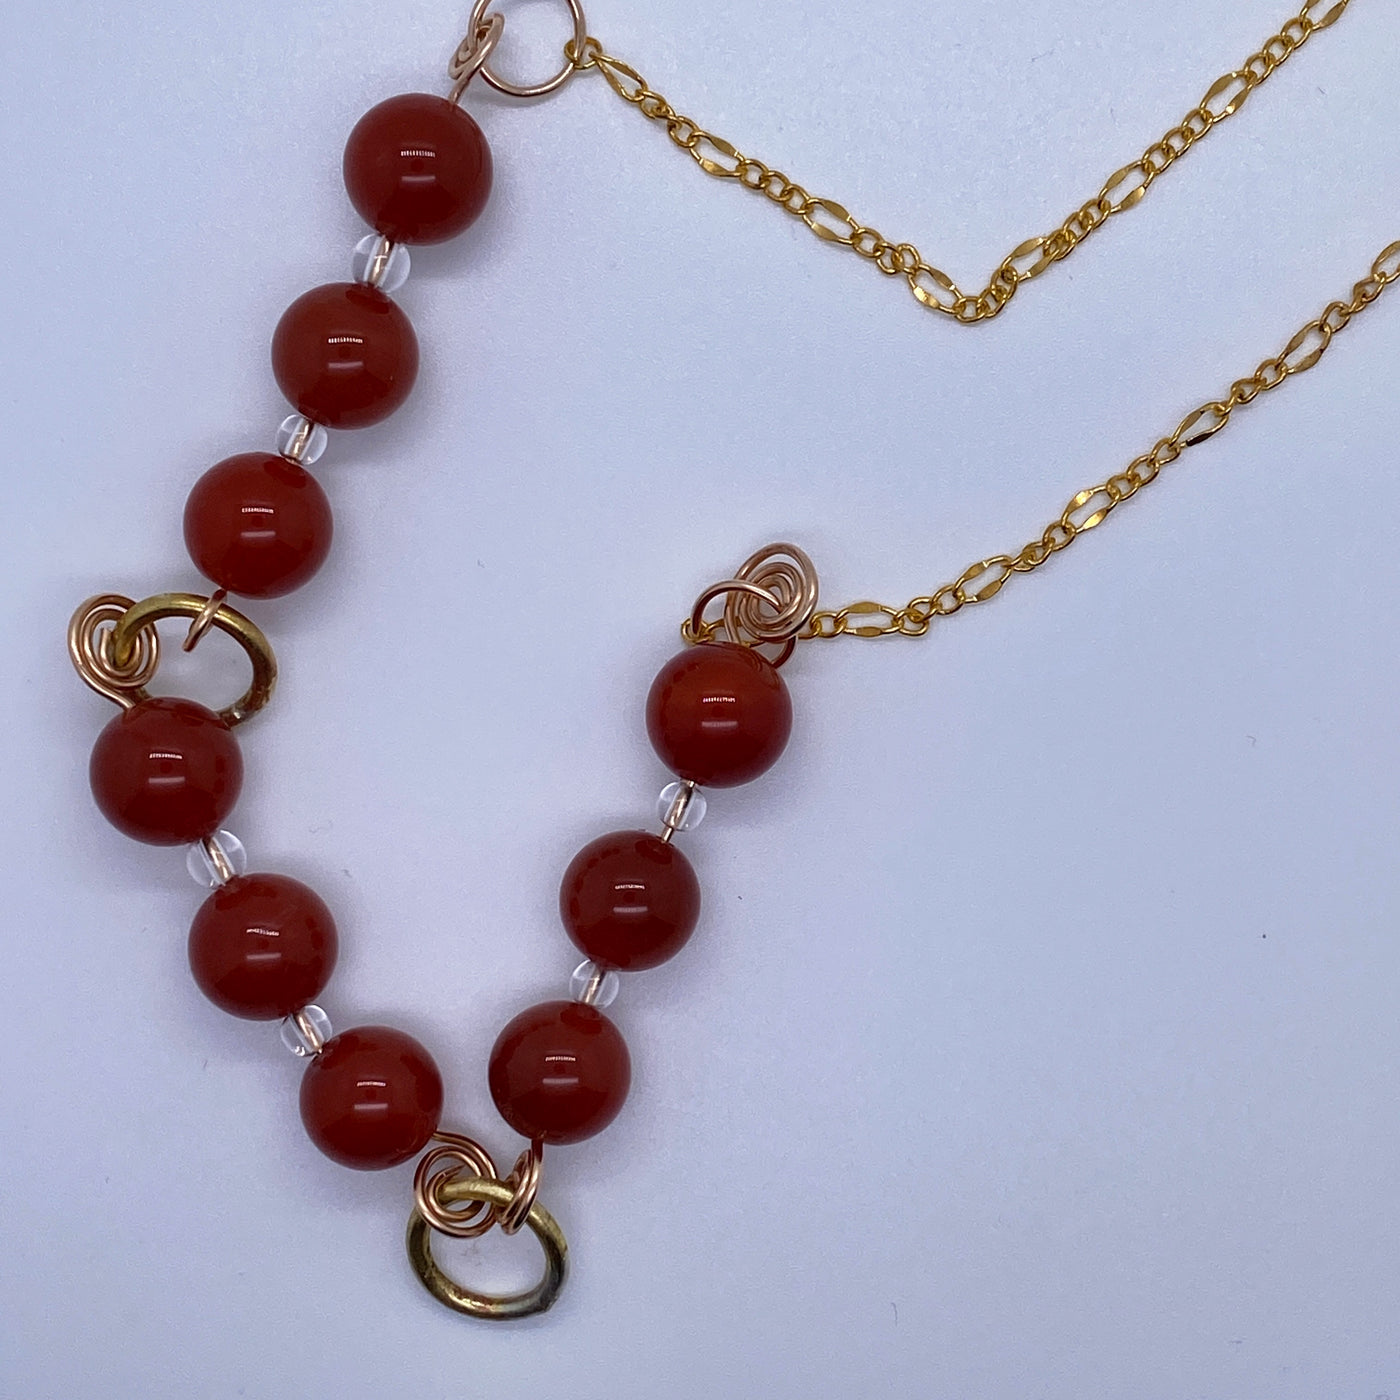 Necklace with red agate, clear quartz and small circles in brass